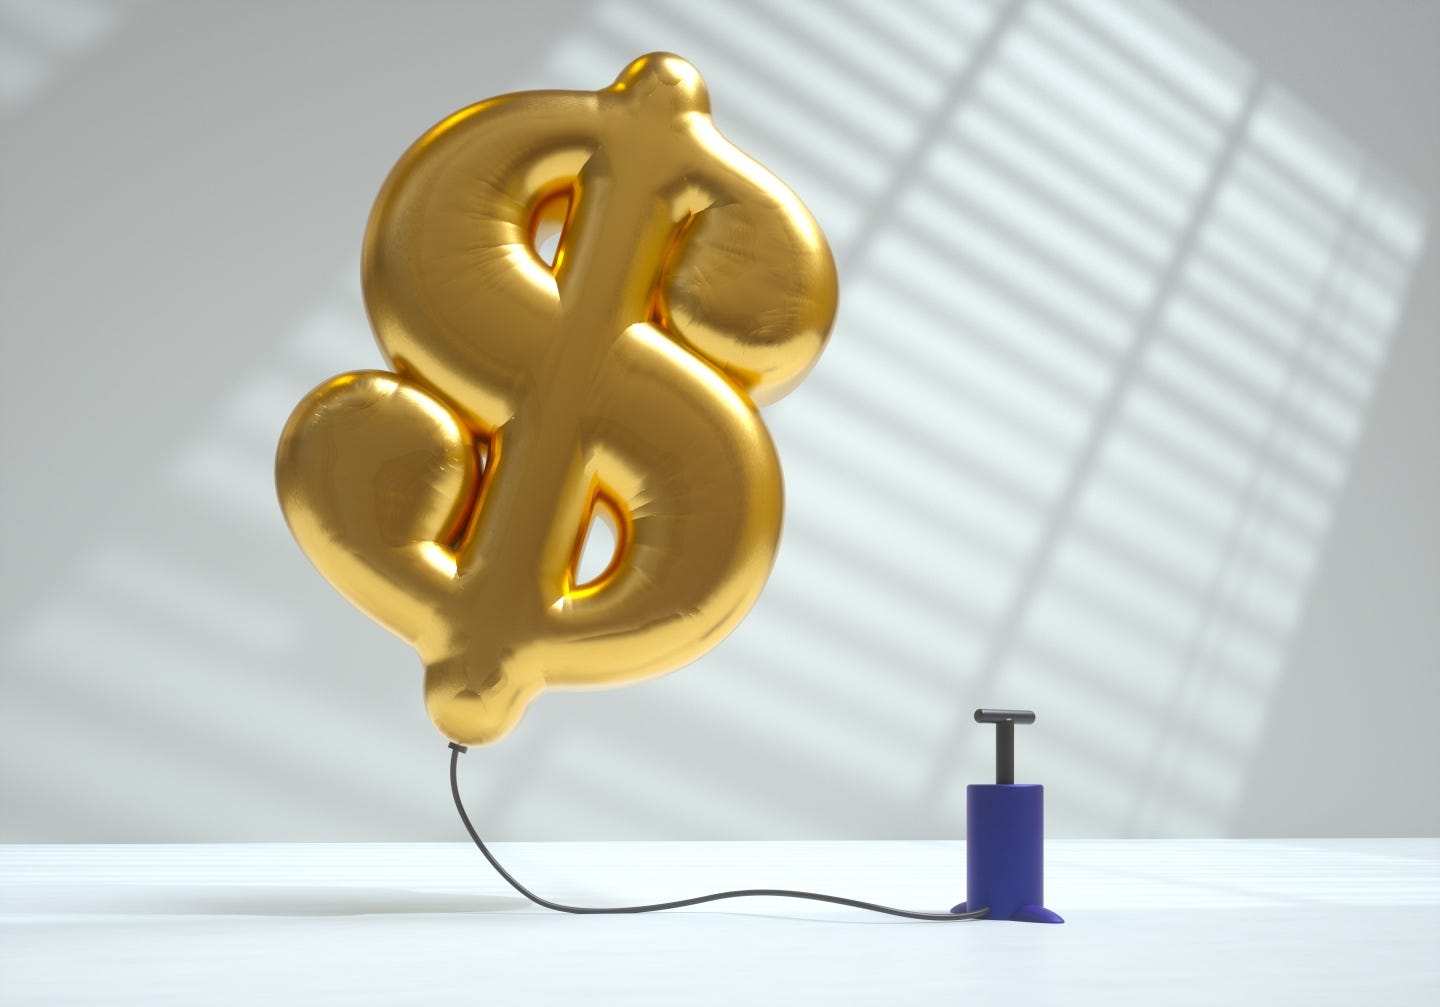 Image of an air pump inflating a golden balloon in the shape of a dollar sign